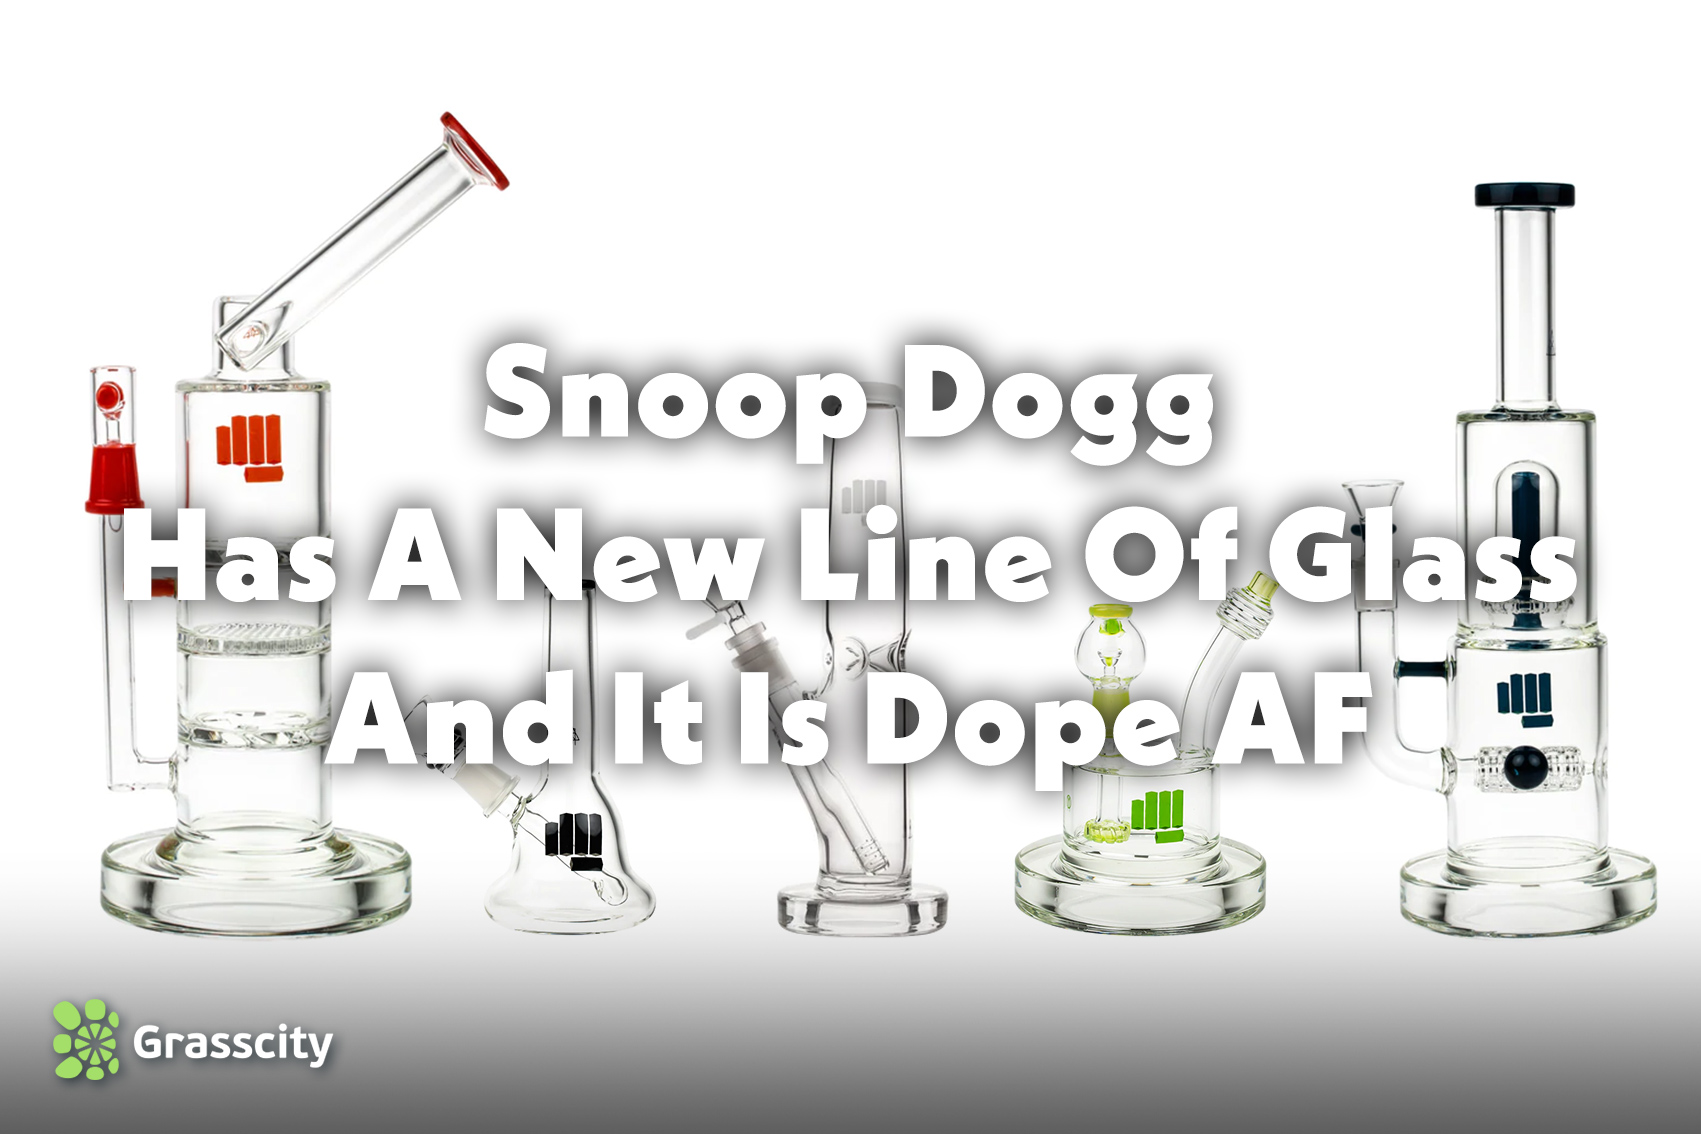 Snoop Dogg Has A New Line Of Glass And It Is Dope AF